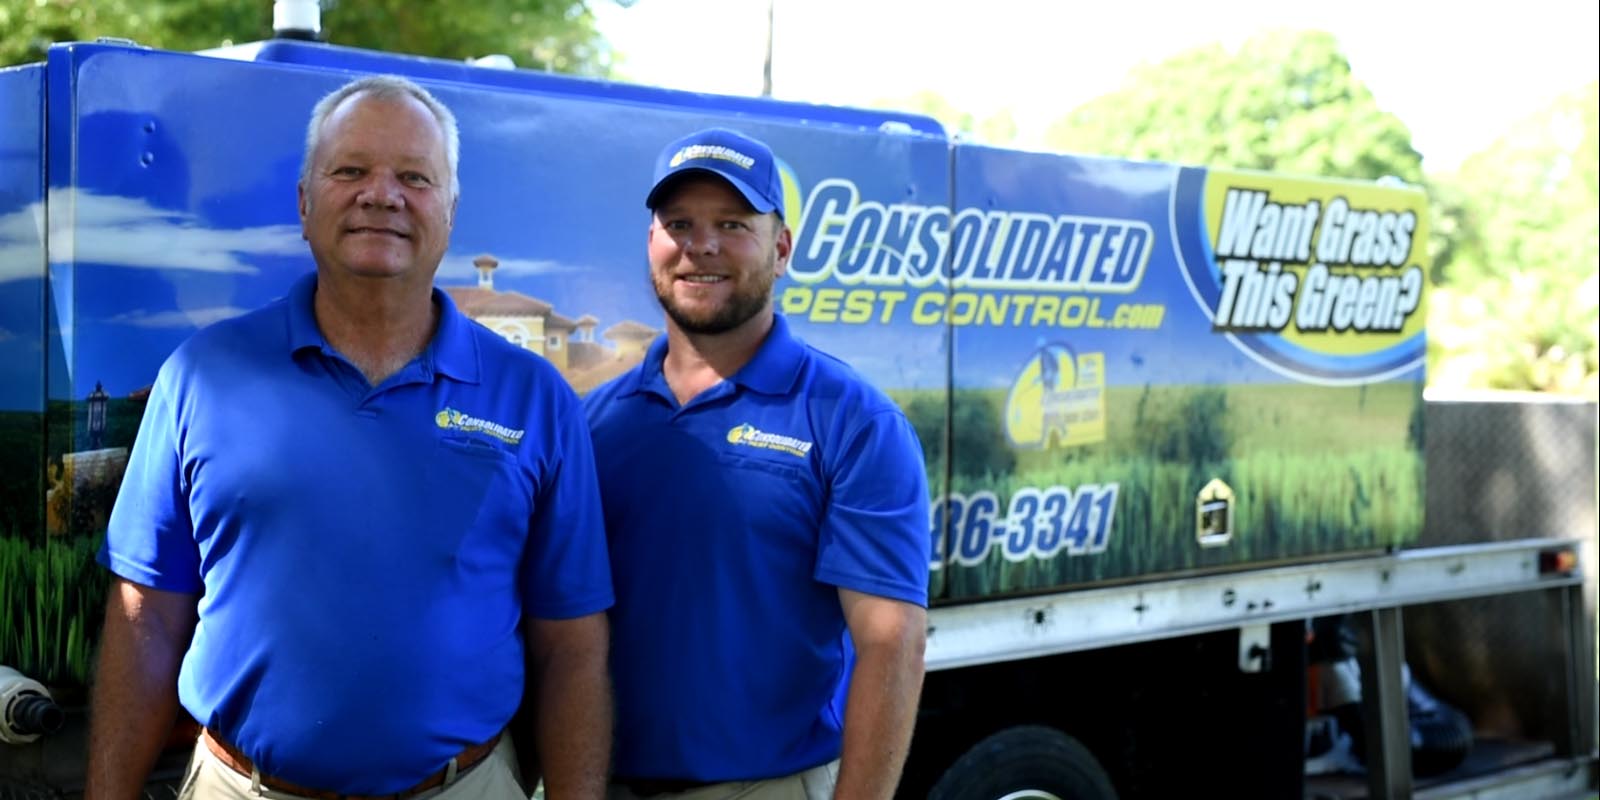 consolidated pest control